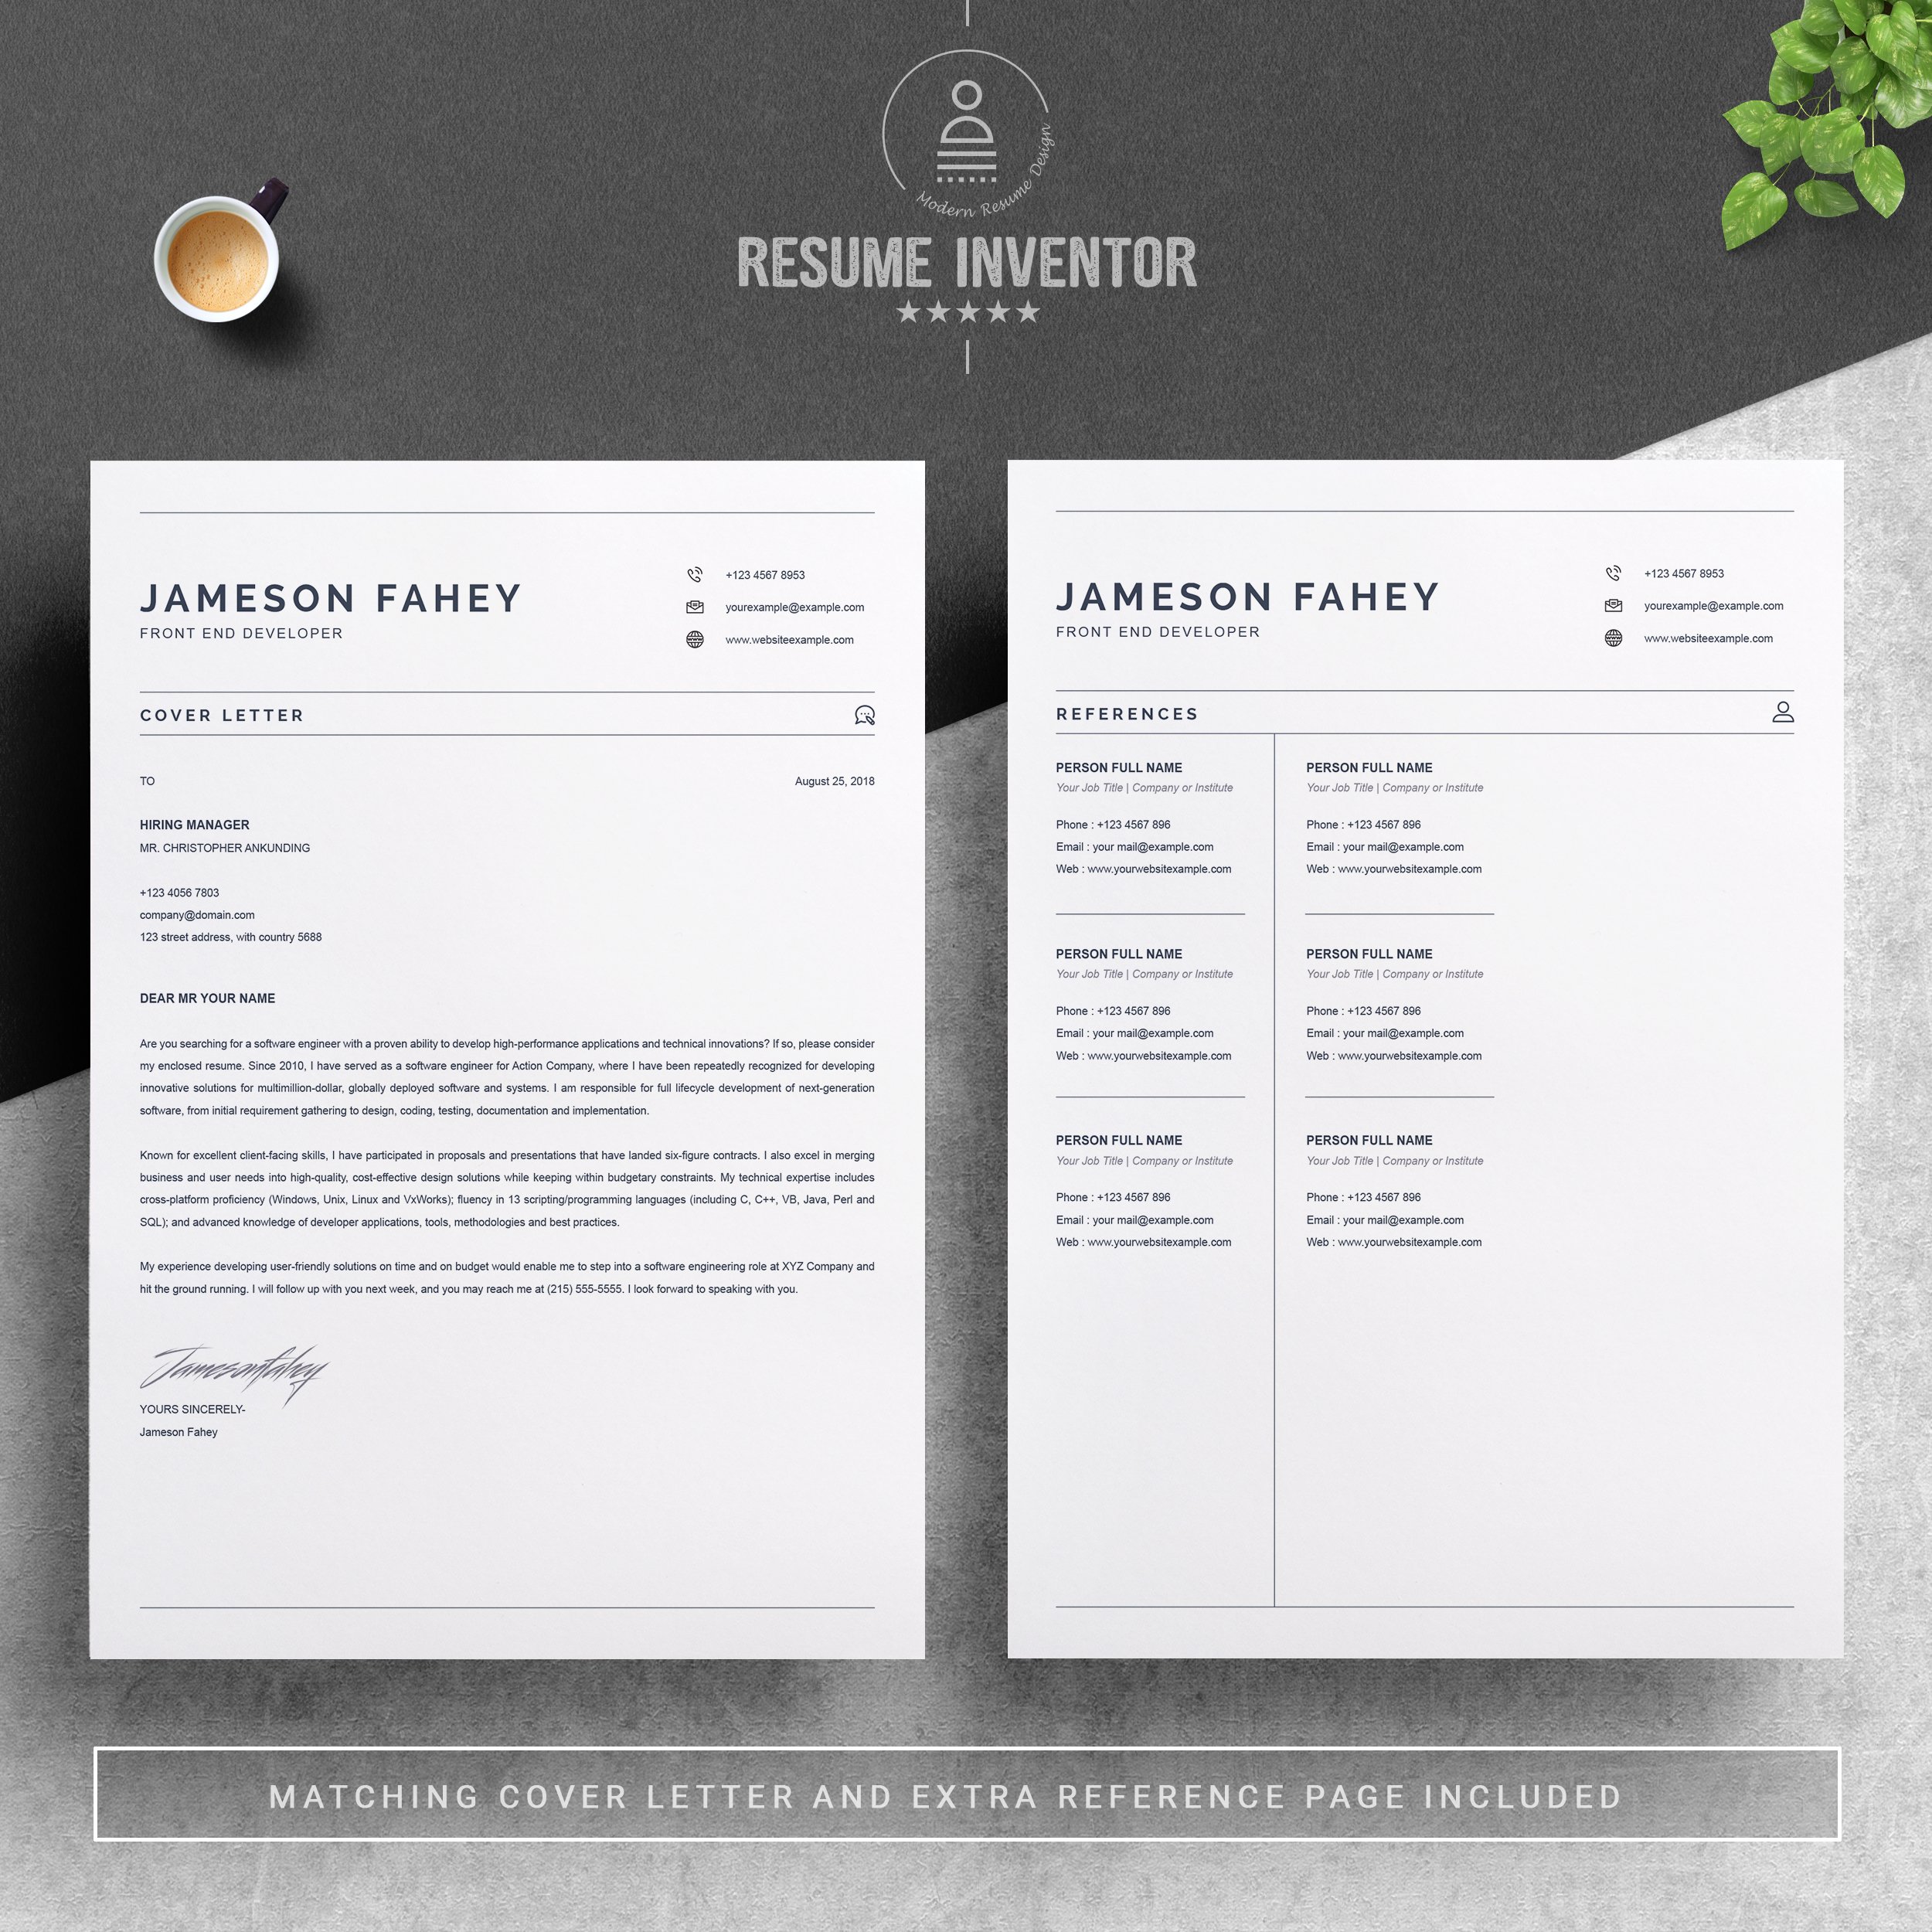 03 2 pages free resume design template 536